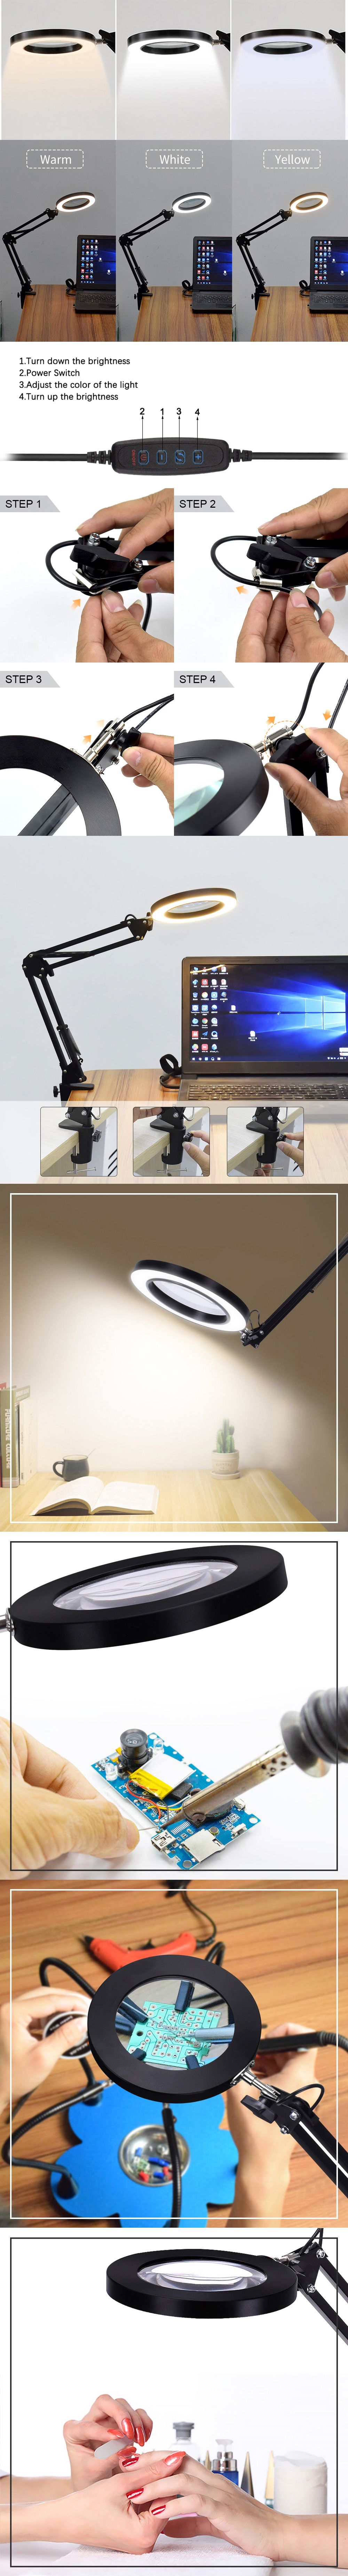 DANIU-Lighting-LED-5X-740mm-Magnifying-Glass-Desk-Lamp-with-Clamp-Hands-USB-powered-LED-Lamp-Magnifi-1611646